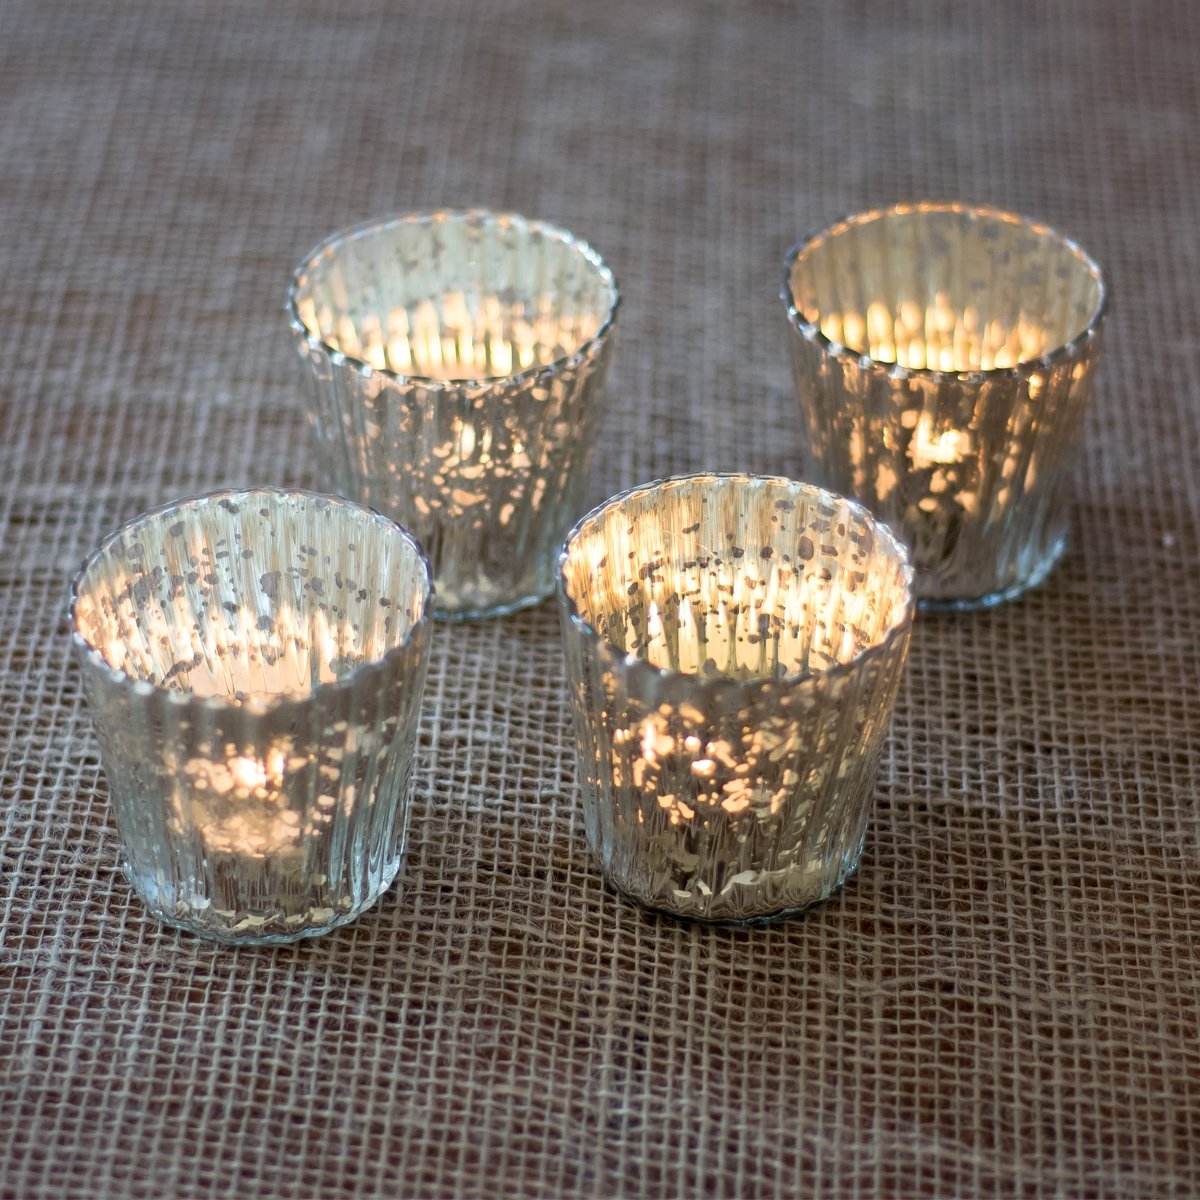 24 Pack | Vintage Mercury Glass Candle Holders (3-Inch, Caroline Design, Vertical Motif, Silver) - For use with Tea Lights - Home Decor, Parties and Wedding Decorations - AsianImportStore.com - B2B Wholesale Lighting and Decor